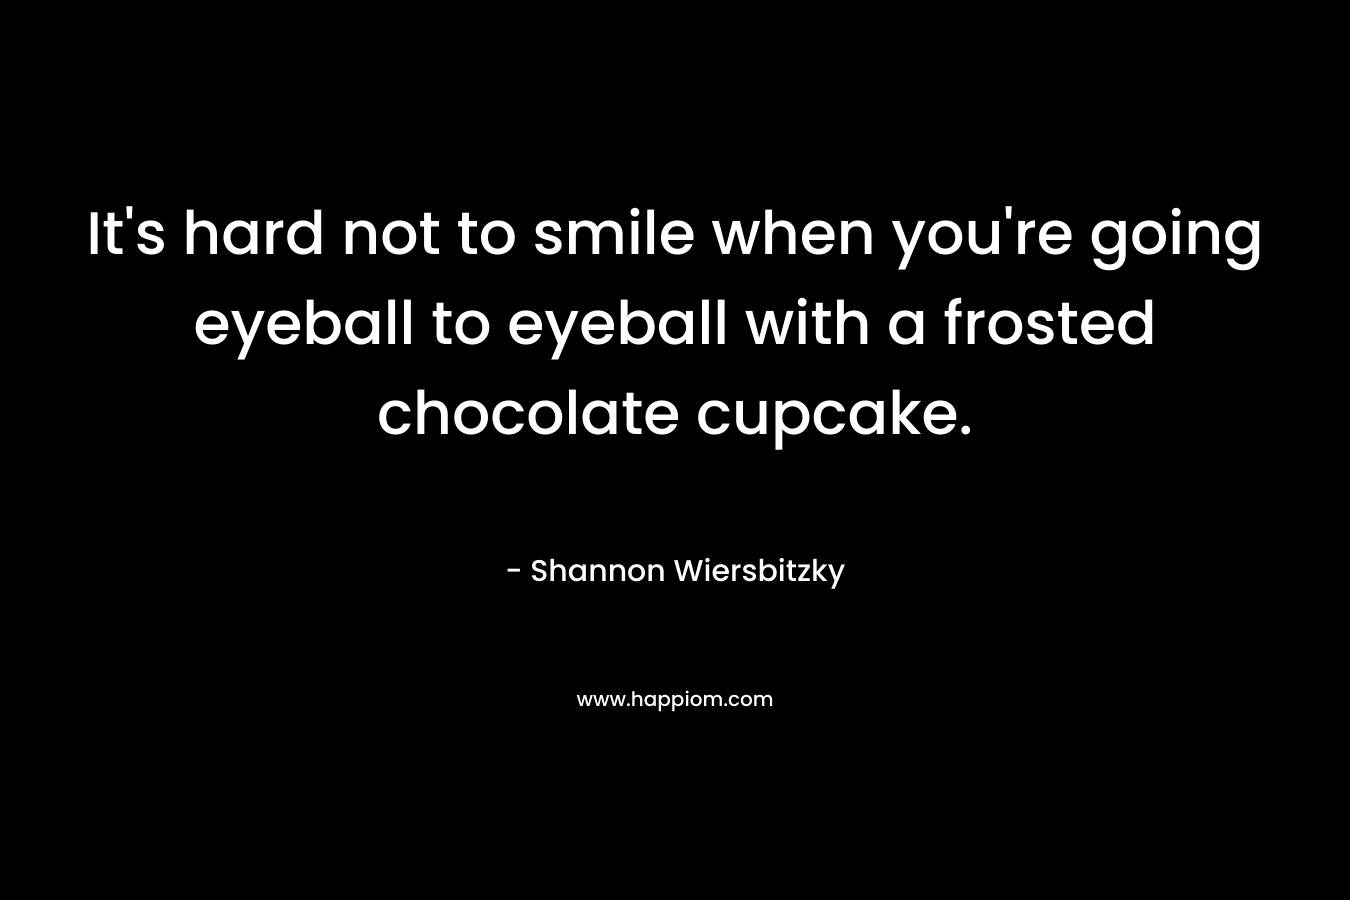 It’s hard not to smile when you’re going eyeball to eyeball with a frosted chocolate cupcake. – Shannon Wiersbitzky